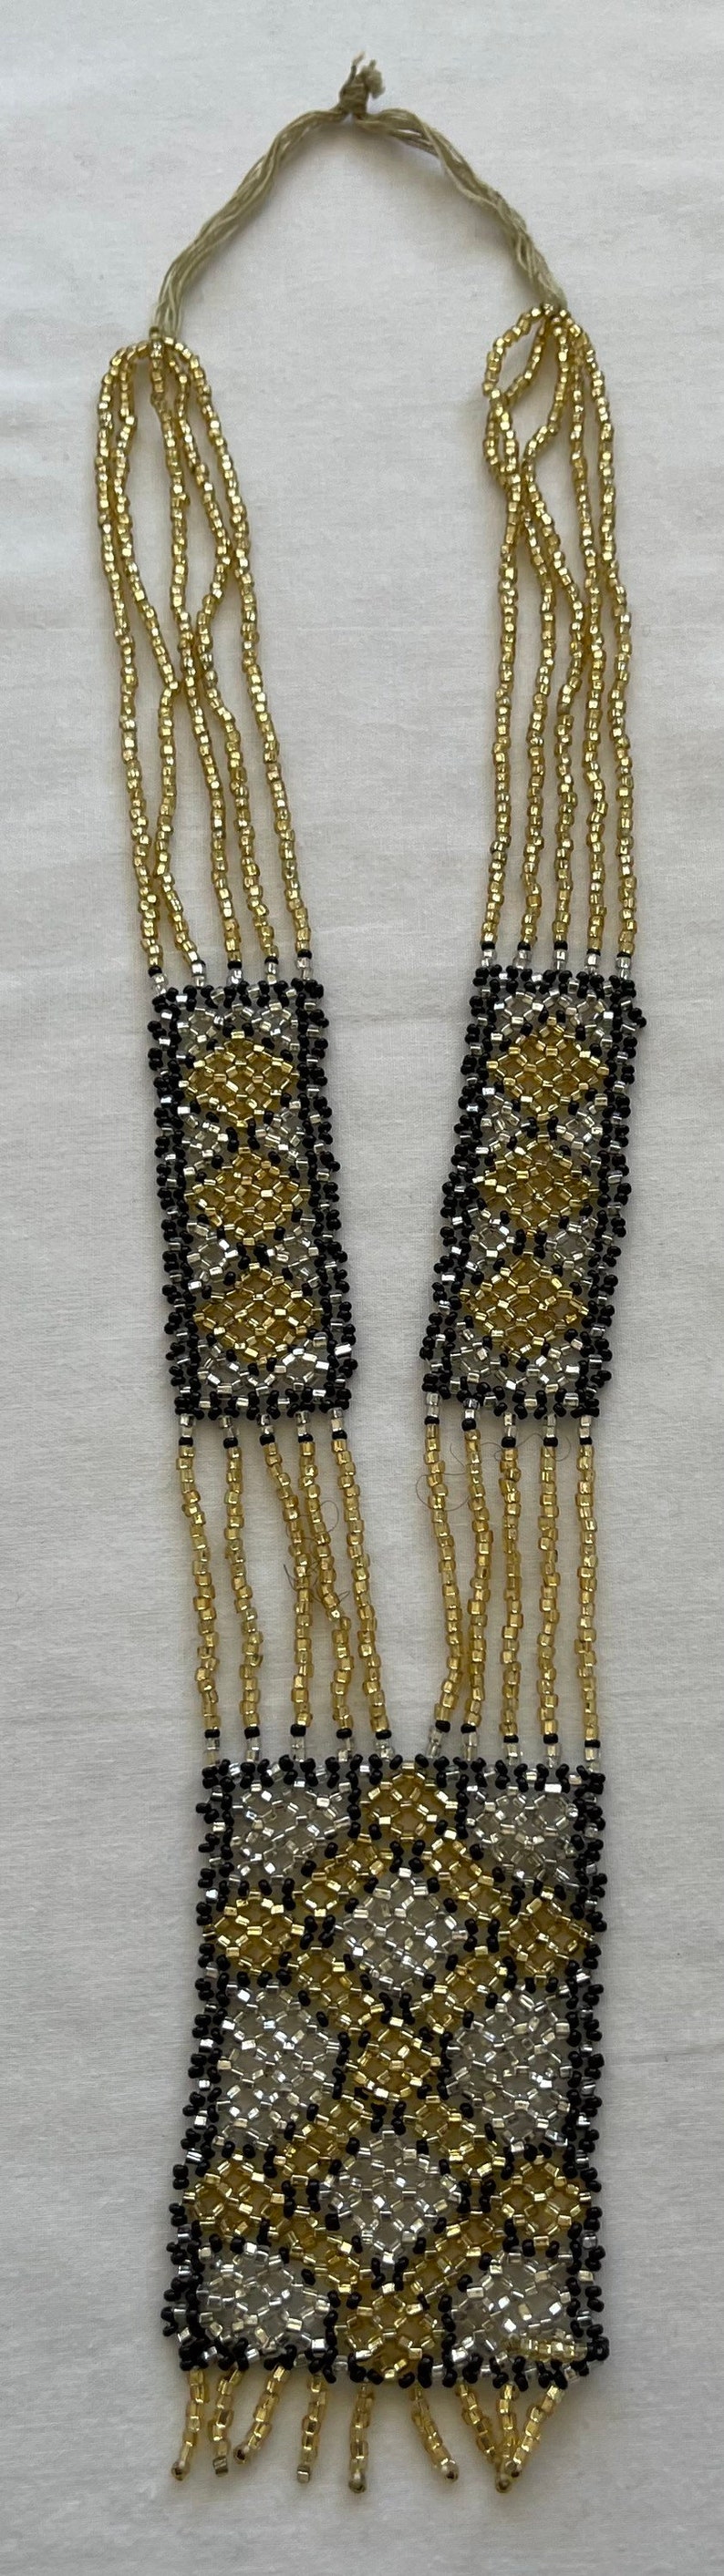 Necklace from the 30s. image 6